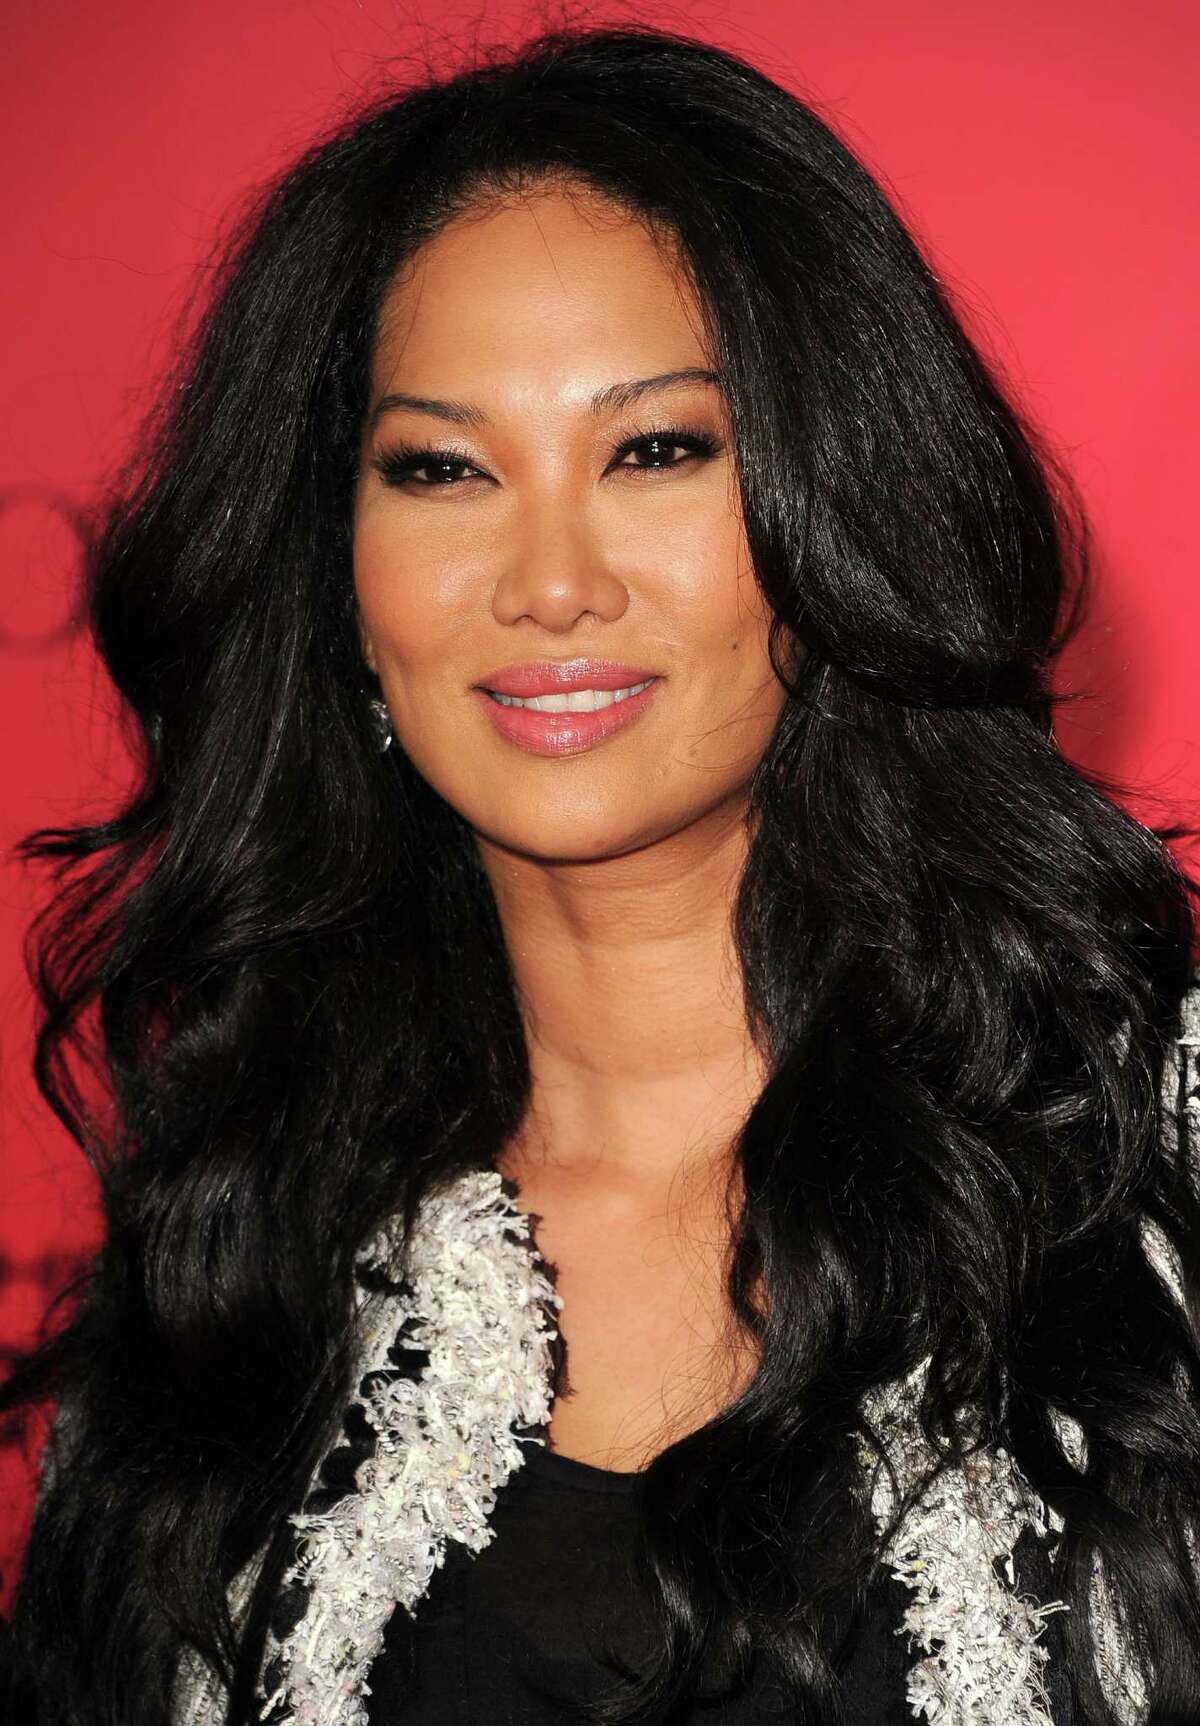 LOS ANGELES, CA - NOVEMBER 18: Kimora Lee Simmons arrives at the "The Hunger Games: Catching Fire" - Los Angeles Premiere at Nokia Theatre L.A. Live on November 18, 2013 in Los Angeles, California. (Photo by Steve Granitz/WireImage)